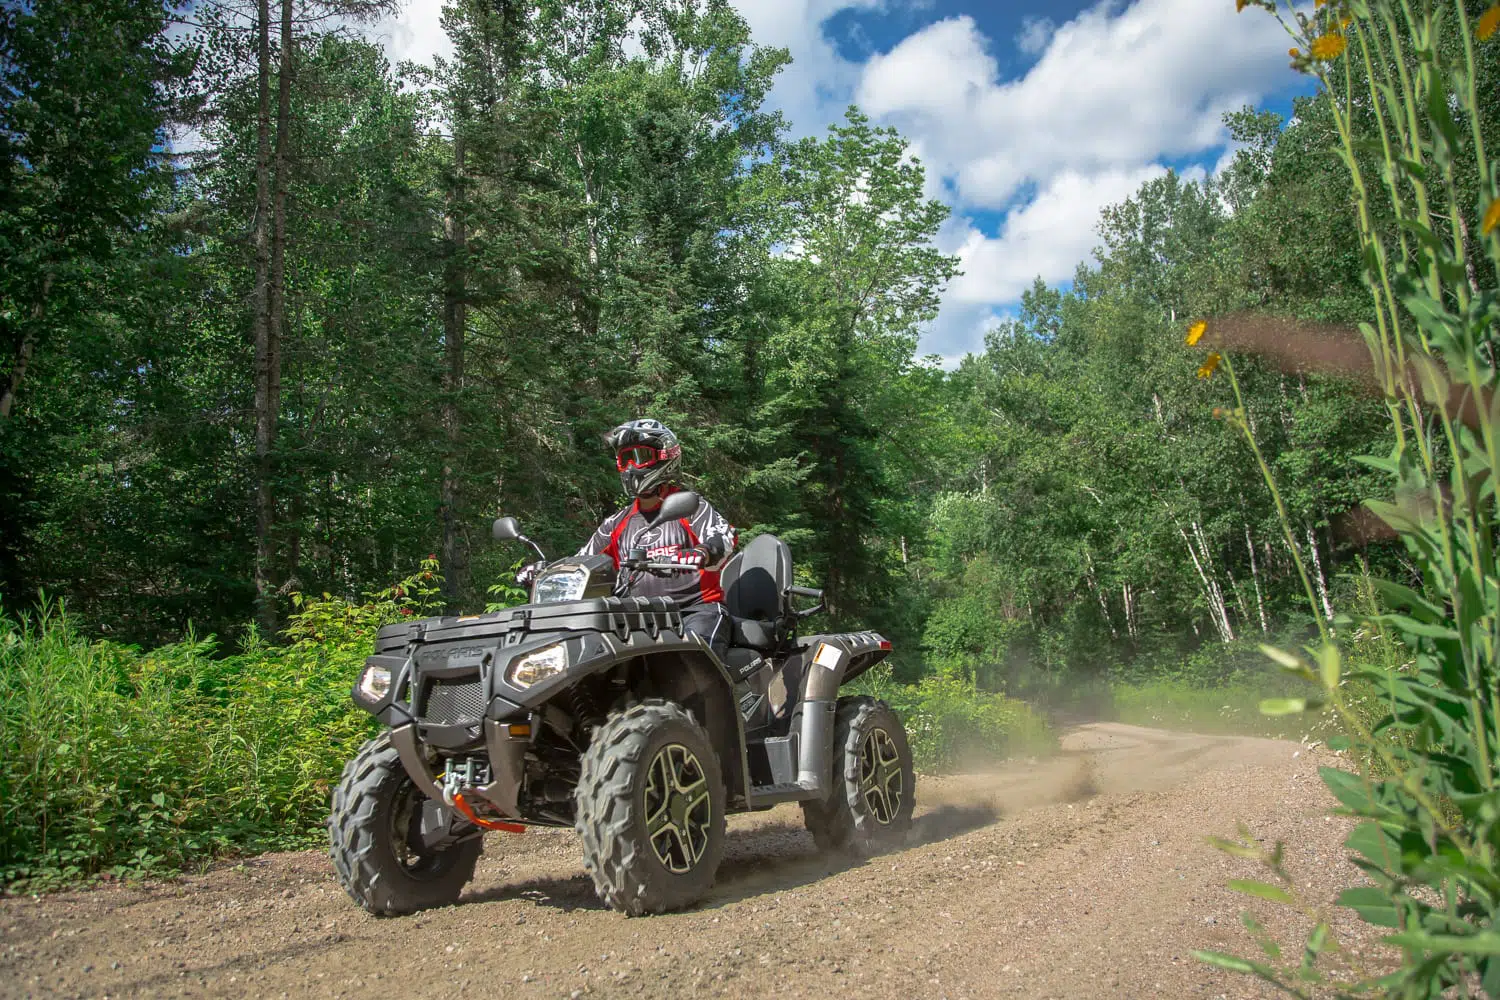 What Are The Advantages Of Riding A Quad Bike?